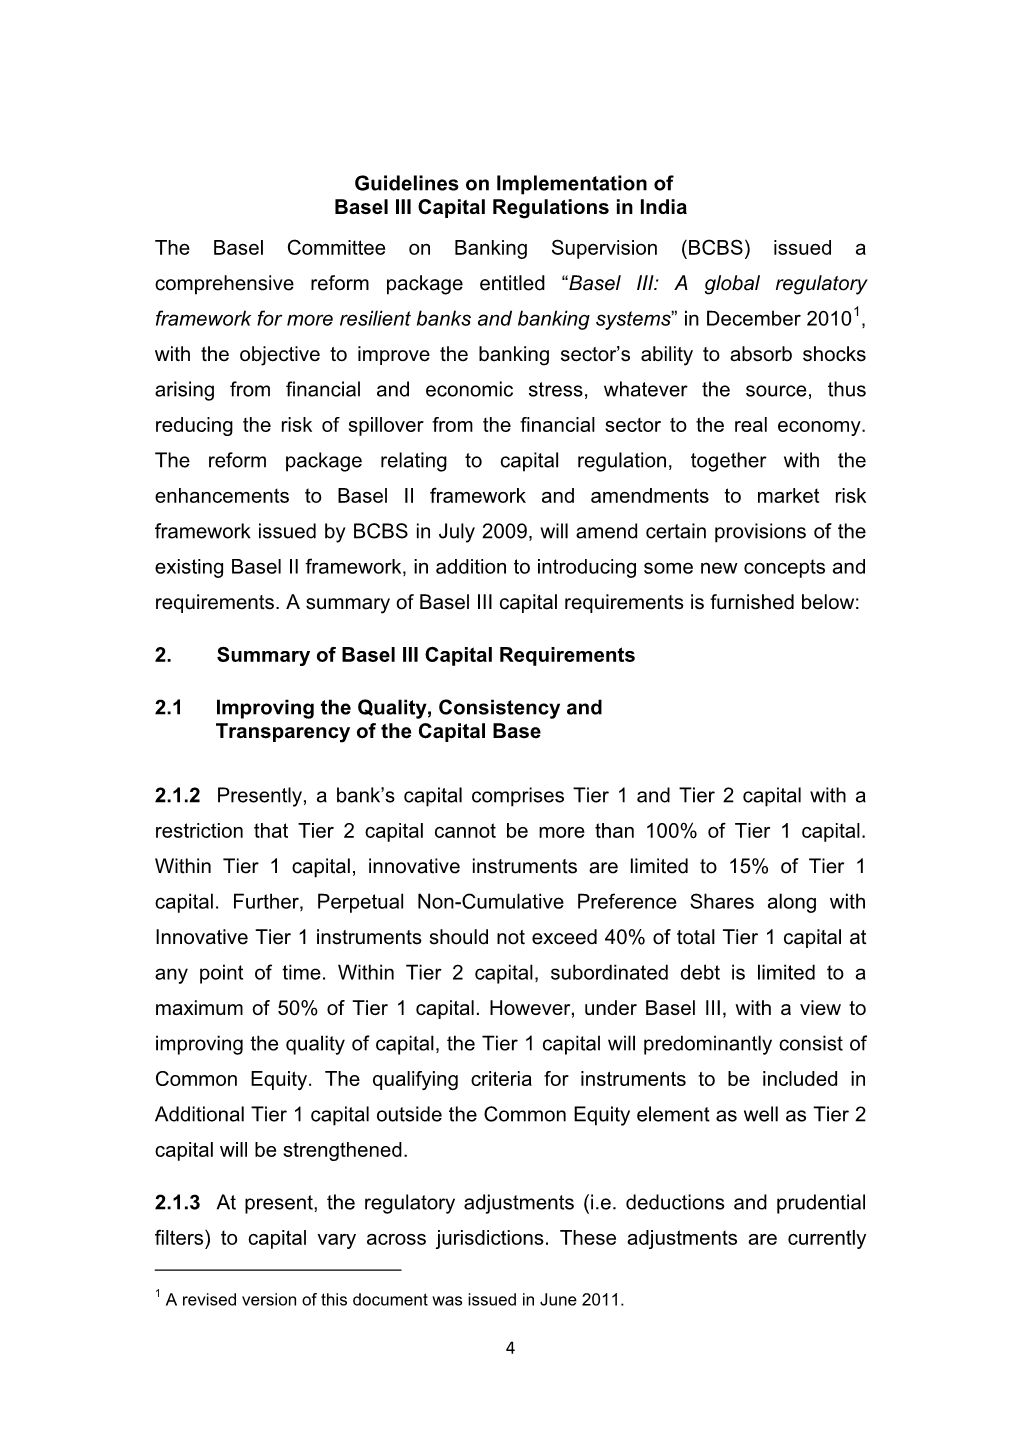 Guidelines on Implementation of Basel III Capital Regulations in India